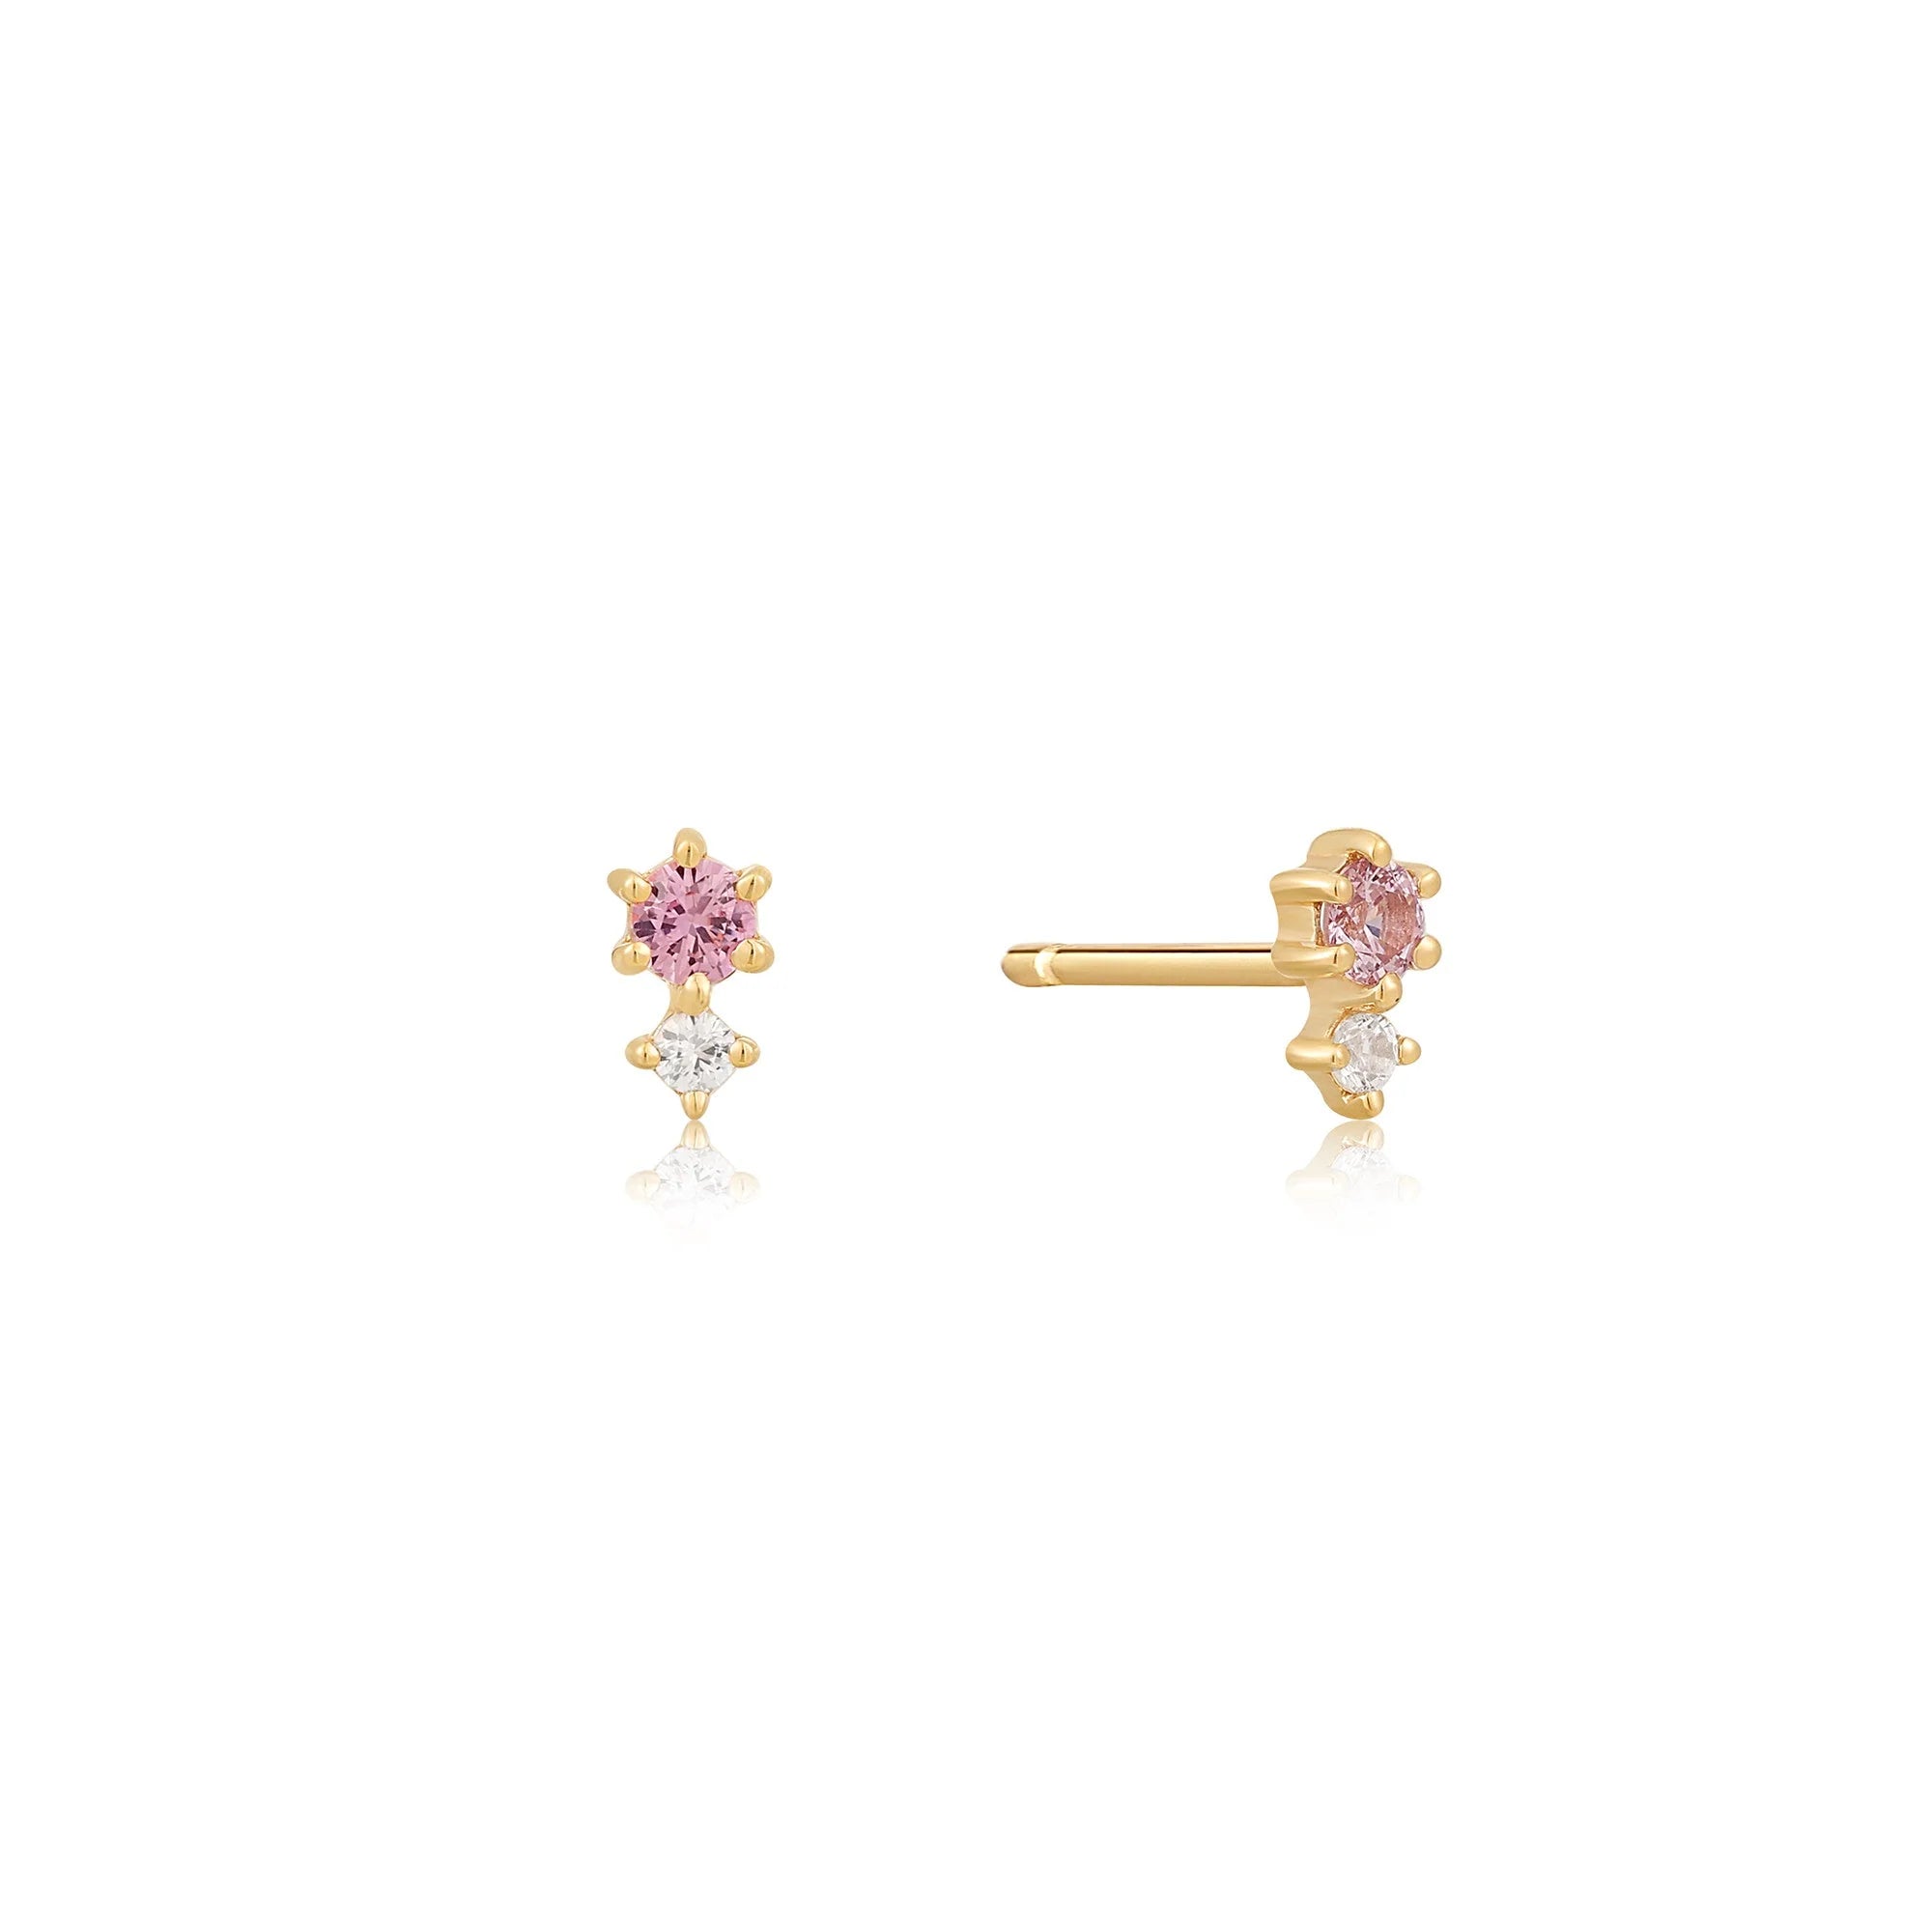 Ania Haie 14kt Gold White and Pink Sapphire Stud Earrings